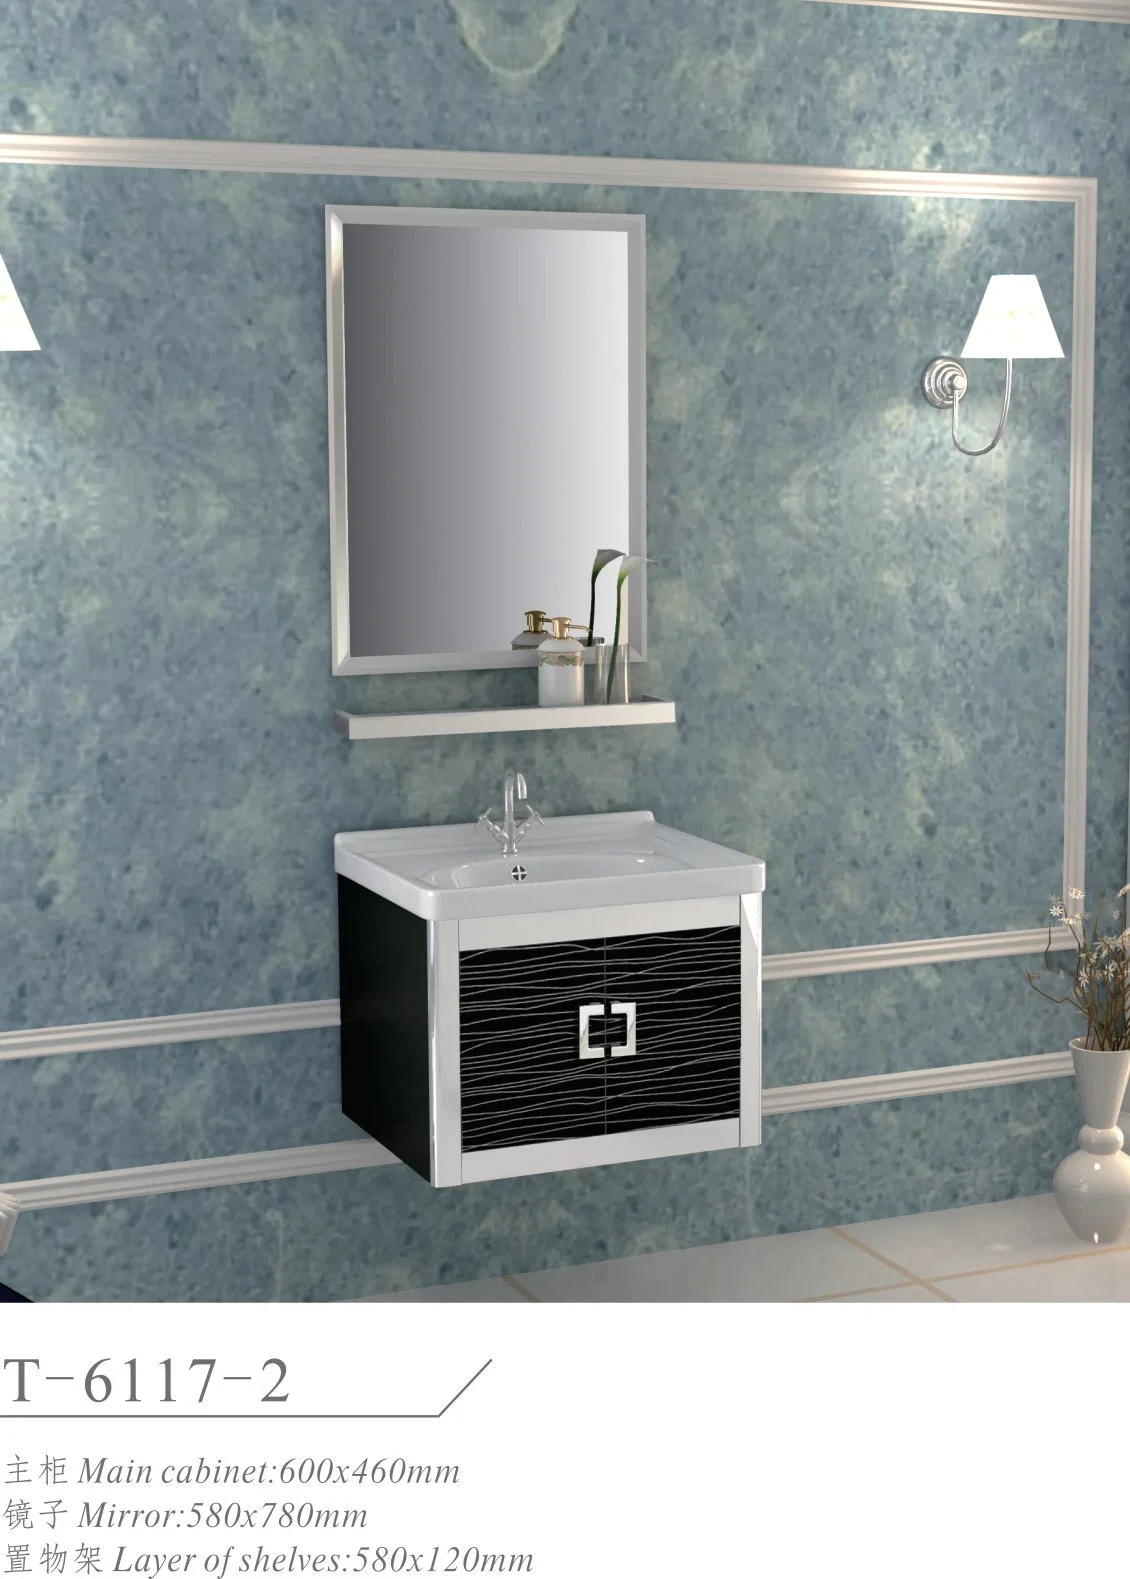 Stainless Steel Wall Cheap Chinese Bathroom Metal Cabinet Chinese Furniture